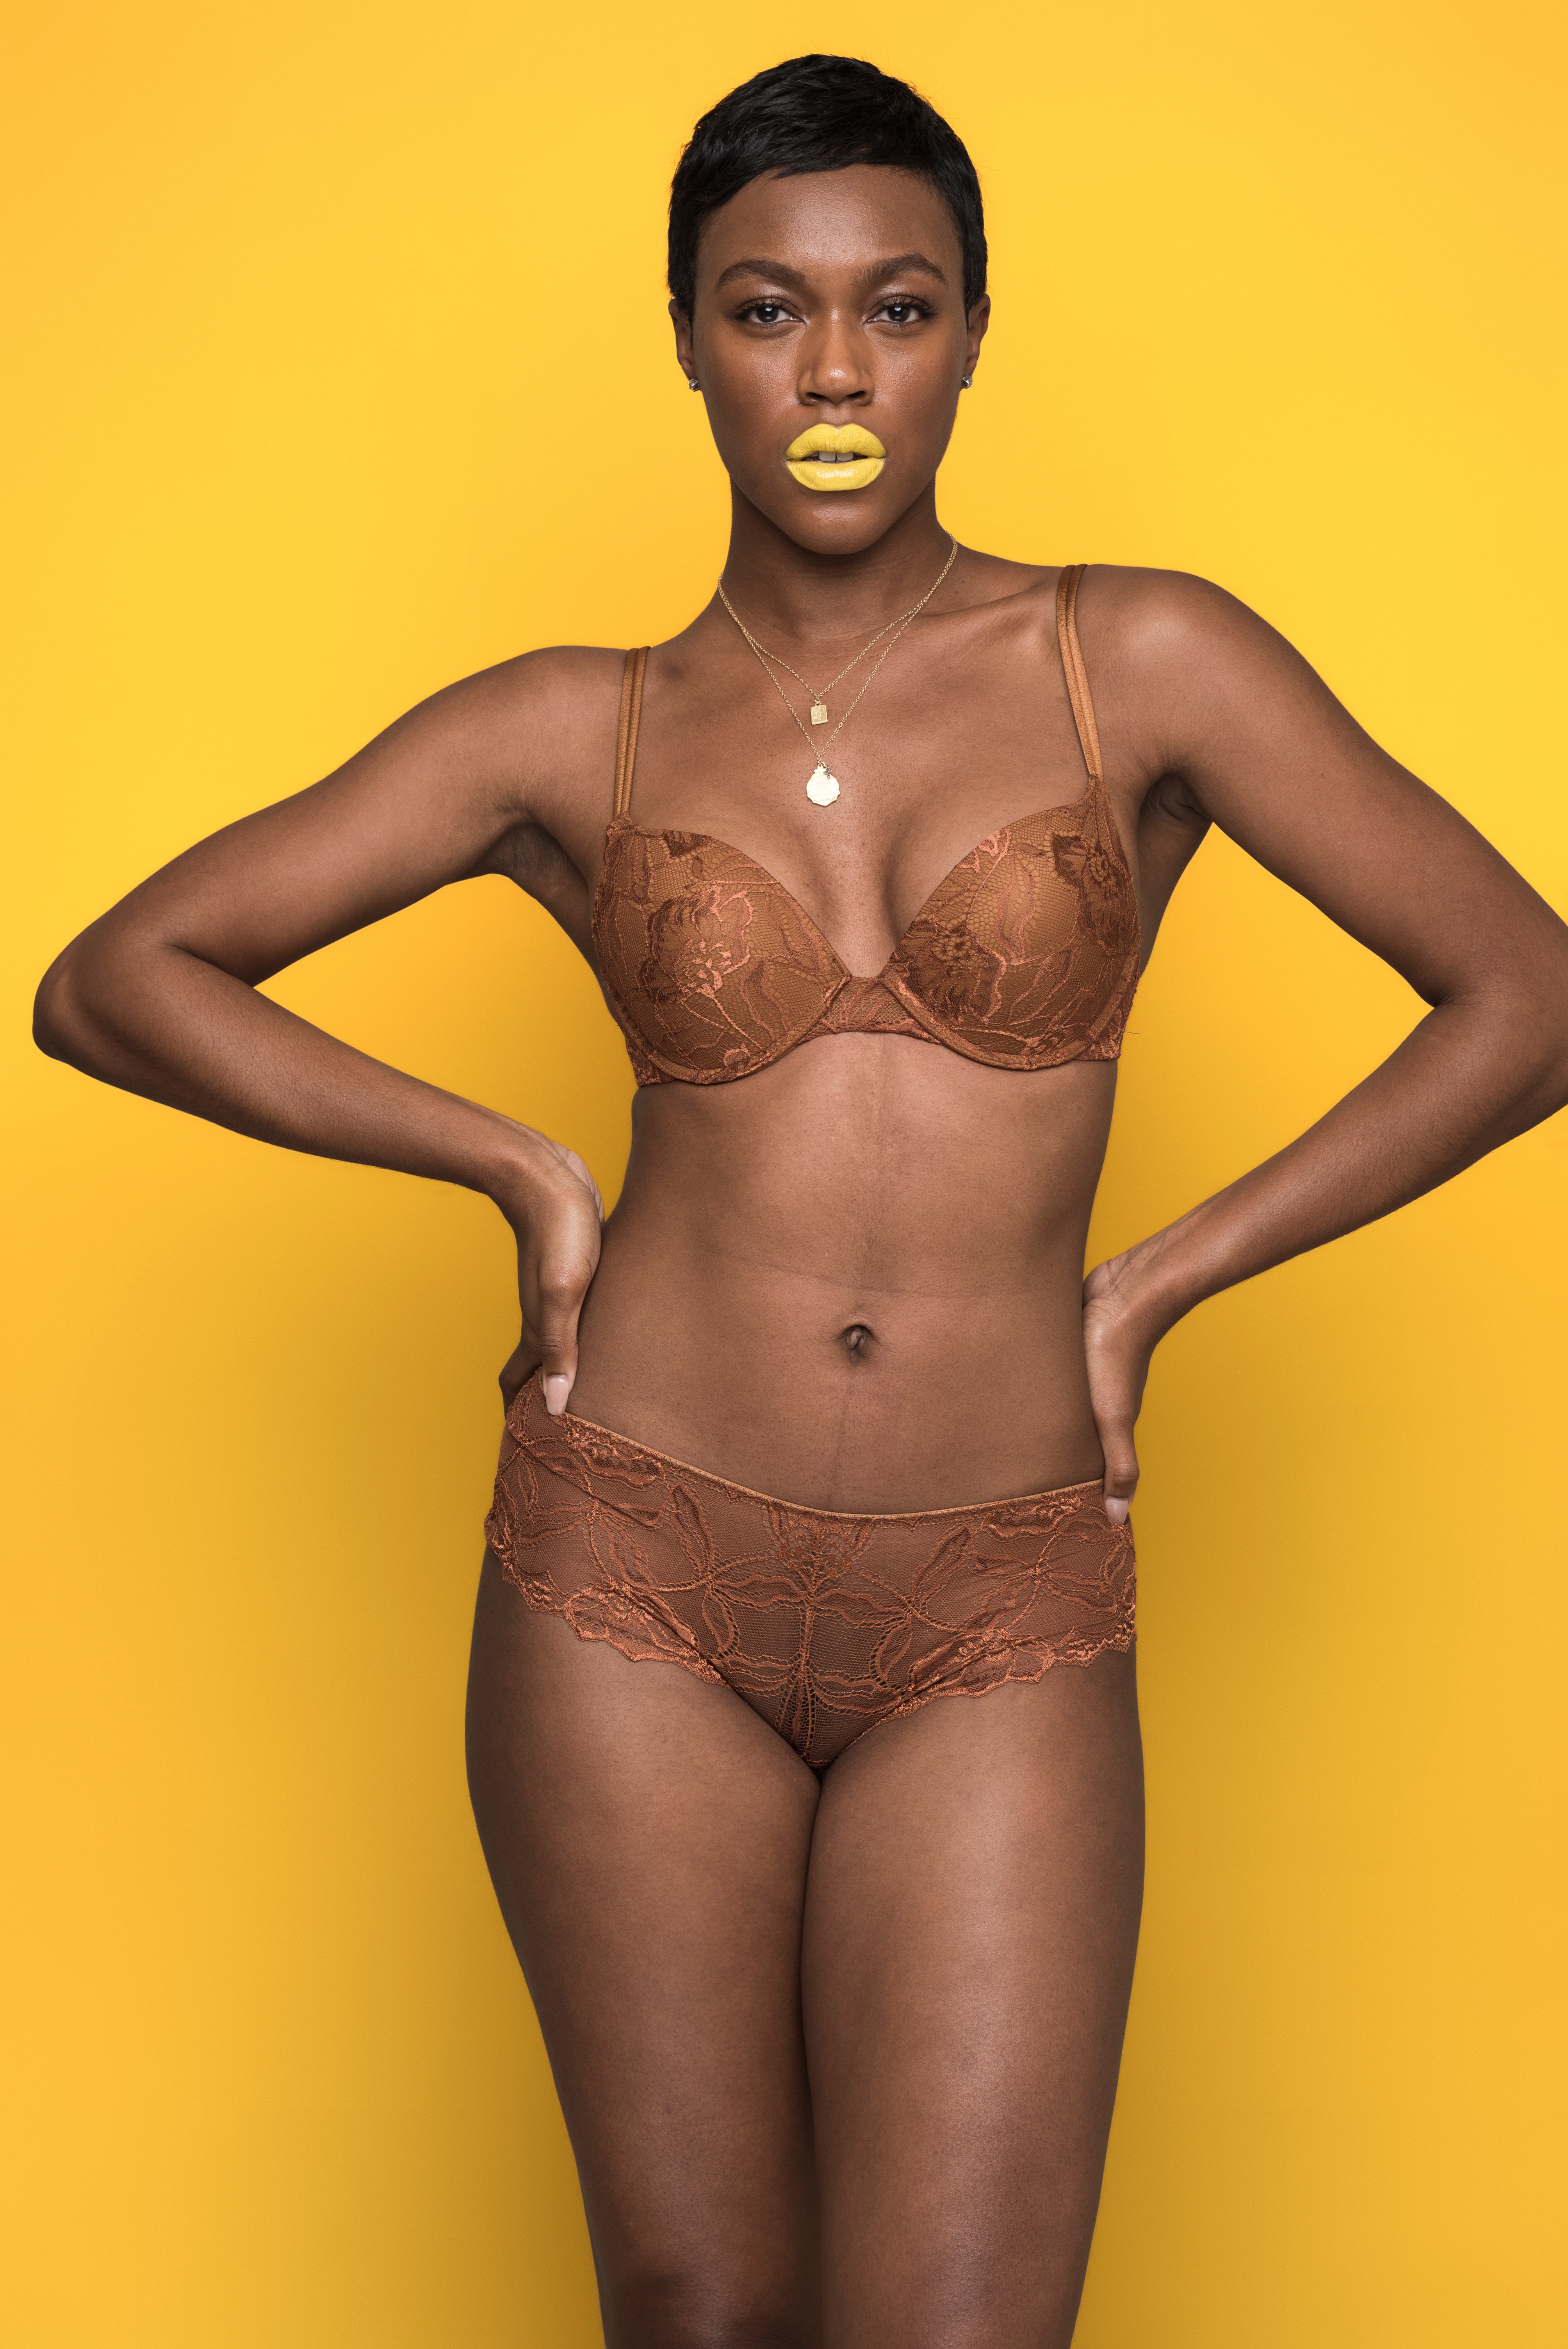 The Colored Girl Features Nubian Skin and Chiki Miki in ‘FULL BLOOM’ Campaign